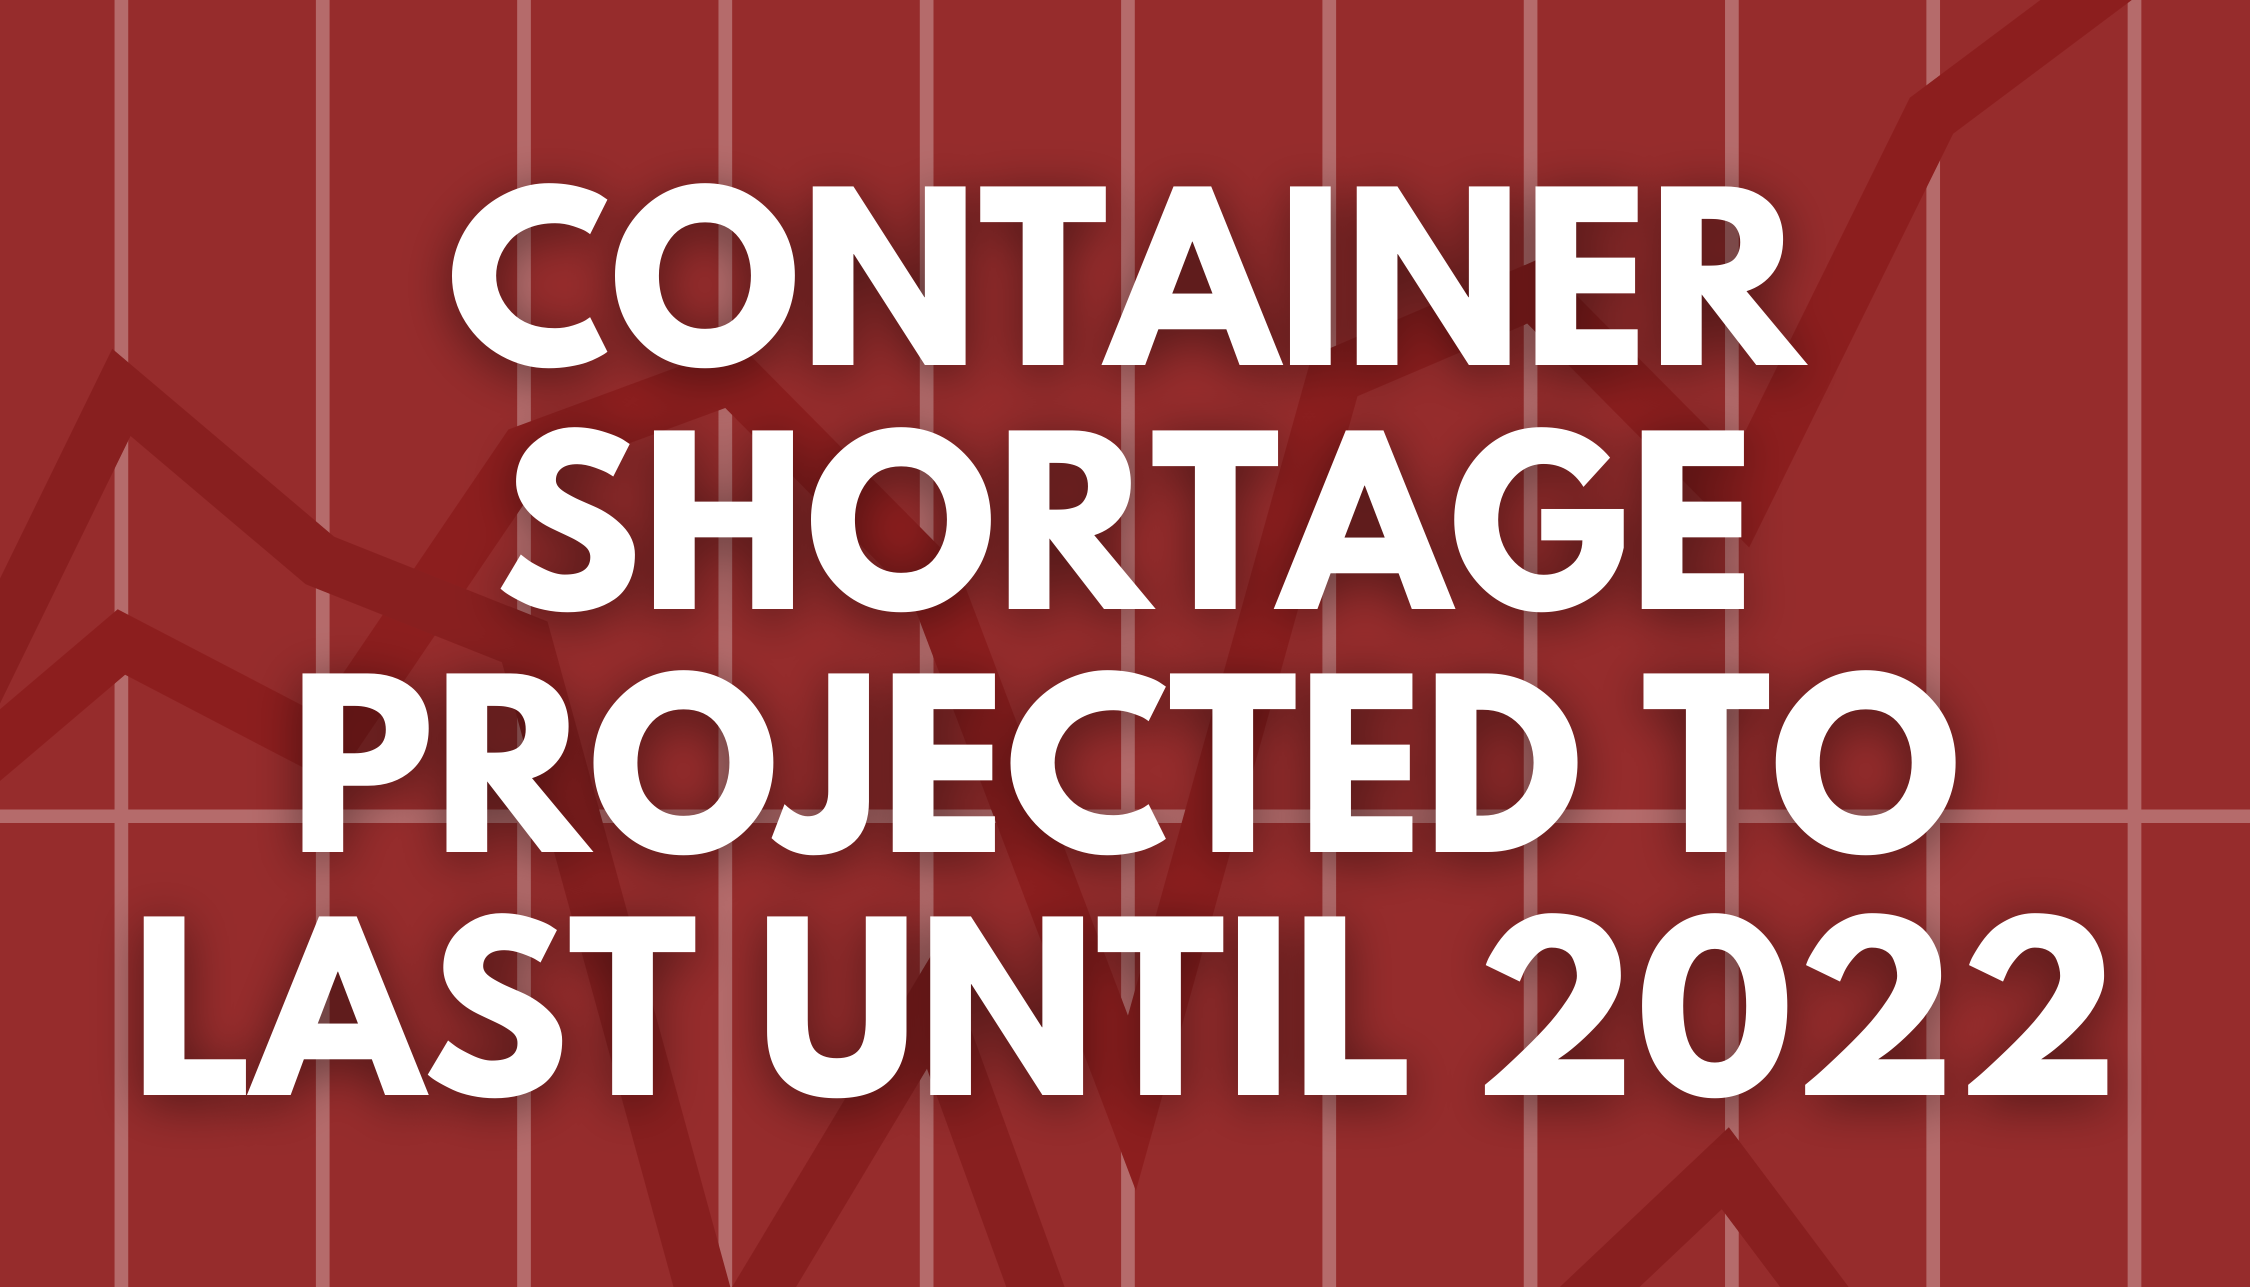 Container Shortage Projected to Last Until 2022